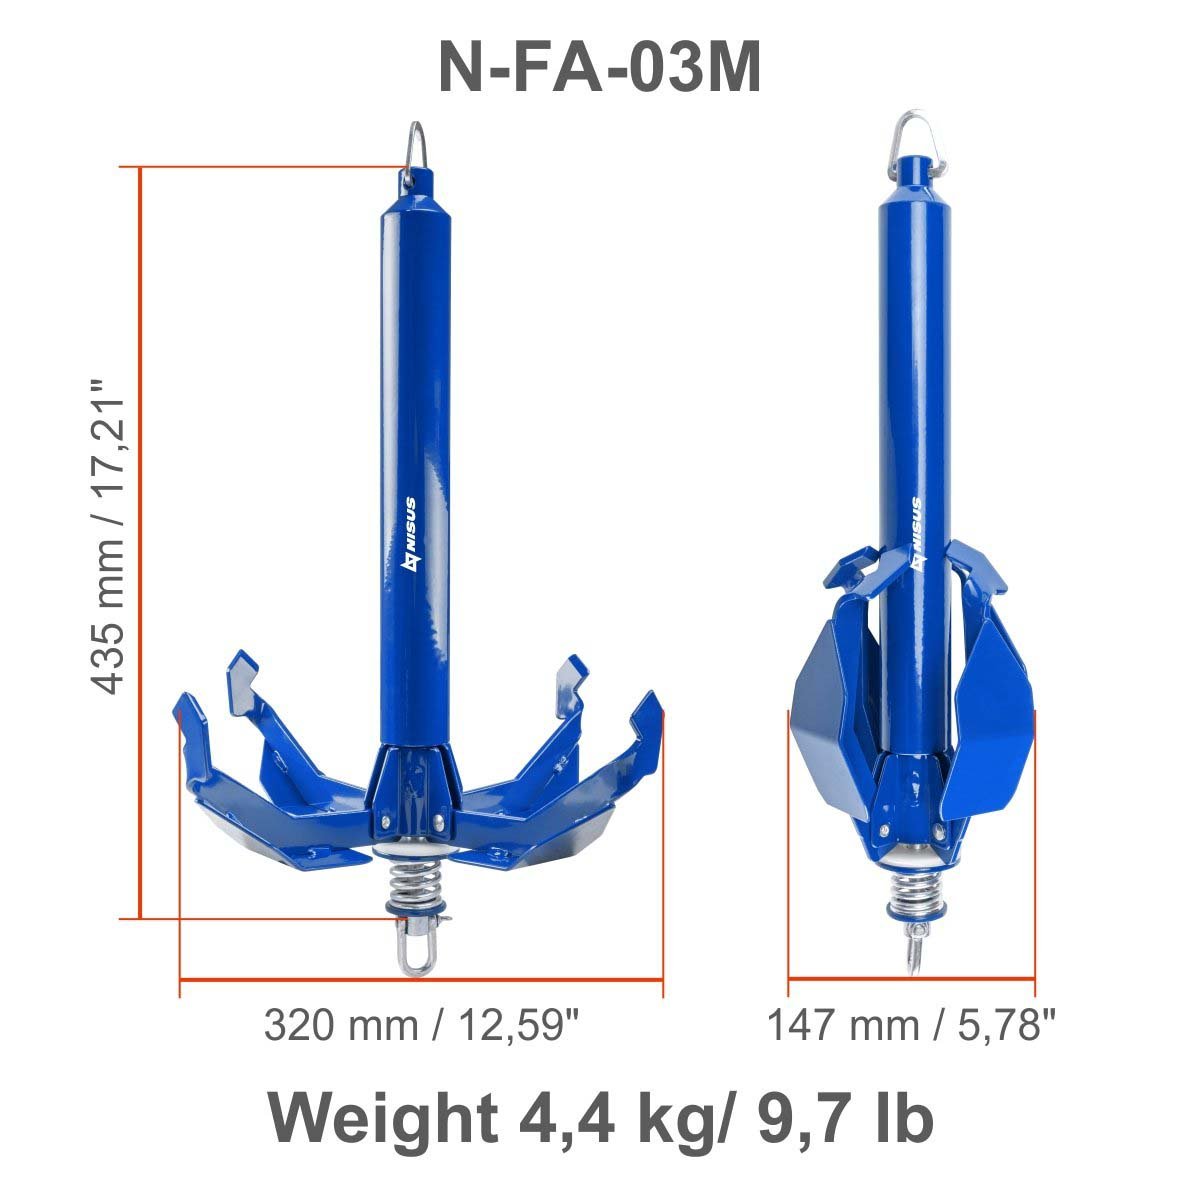 9.7 lbs Grapnel Portable Folding Anchor is 17.2 inches long, 12.6 inches wide when unfolded and 5.8 inches wide when folded, weighing 9.7 lbs